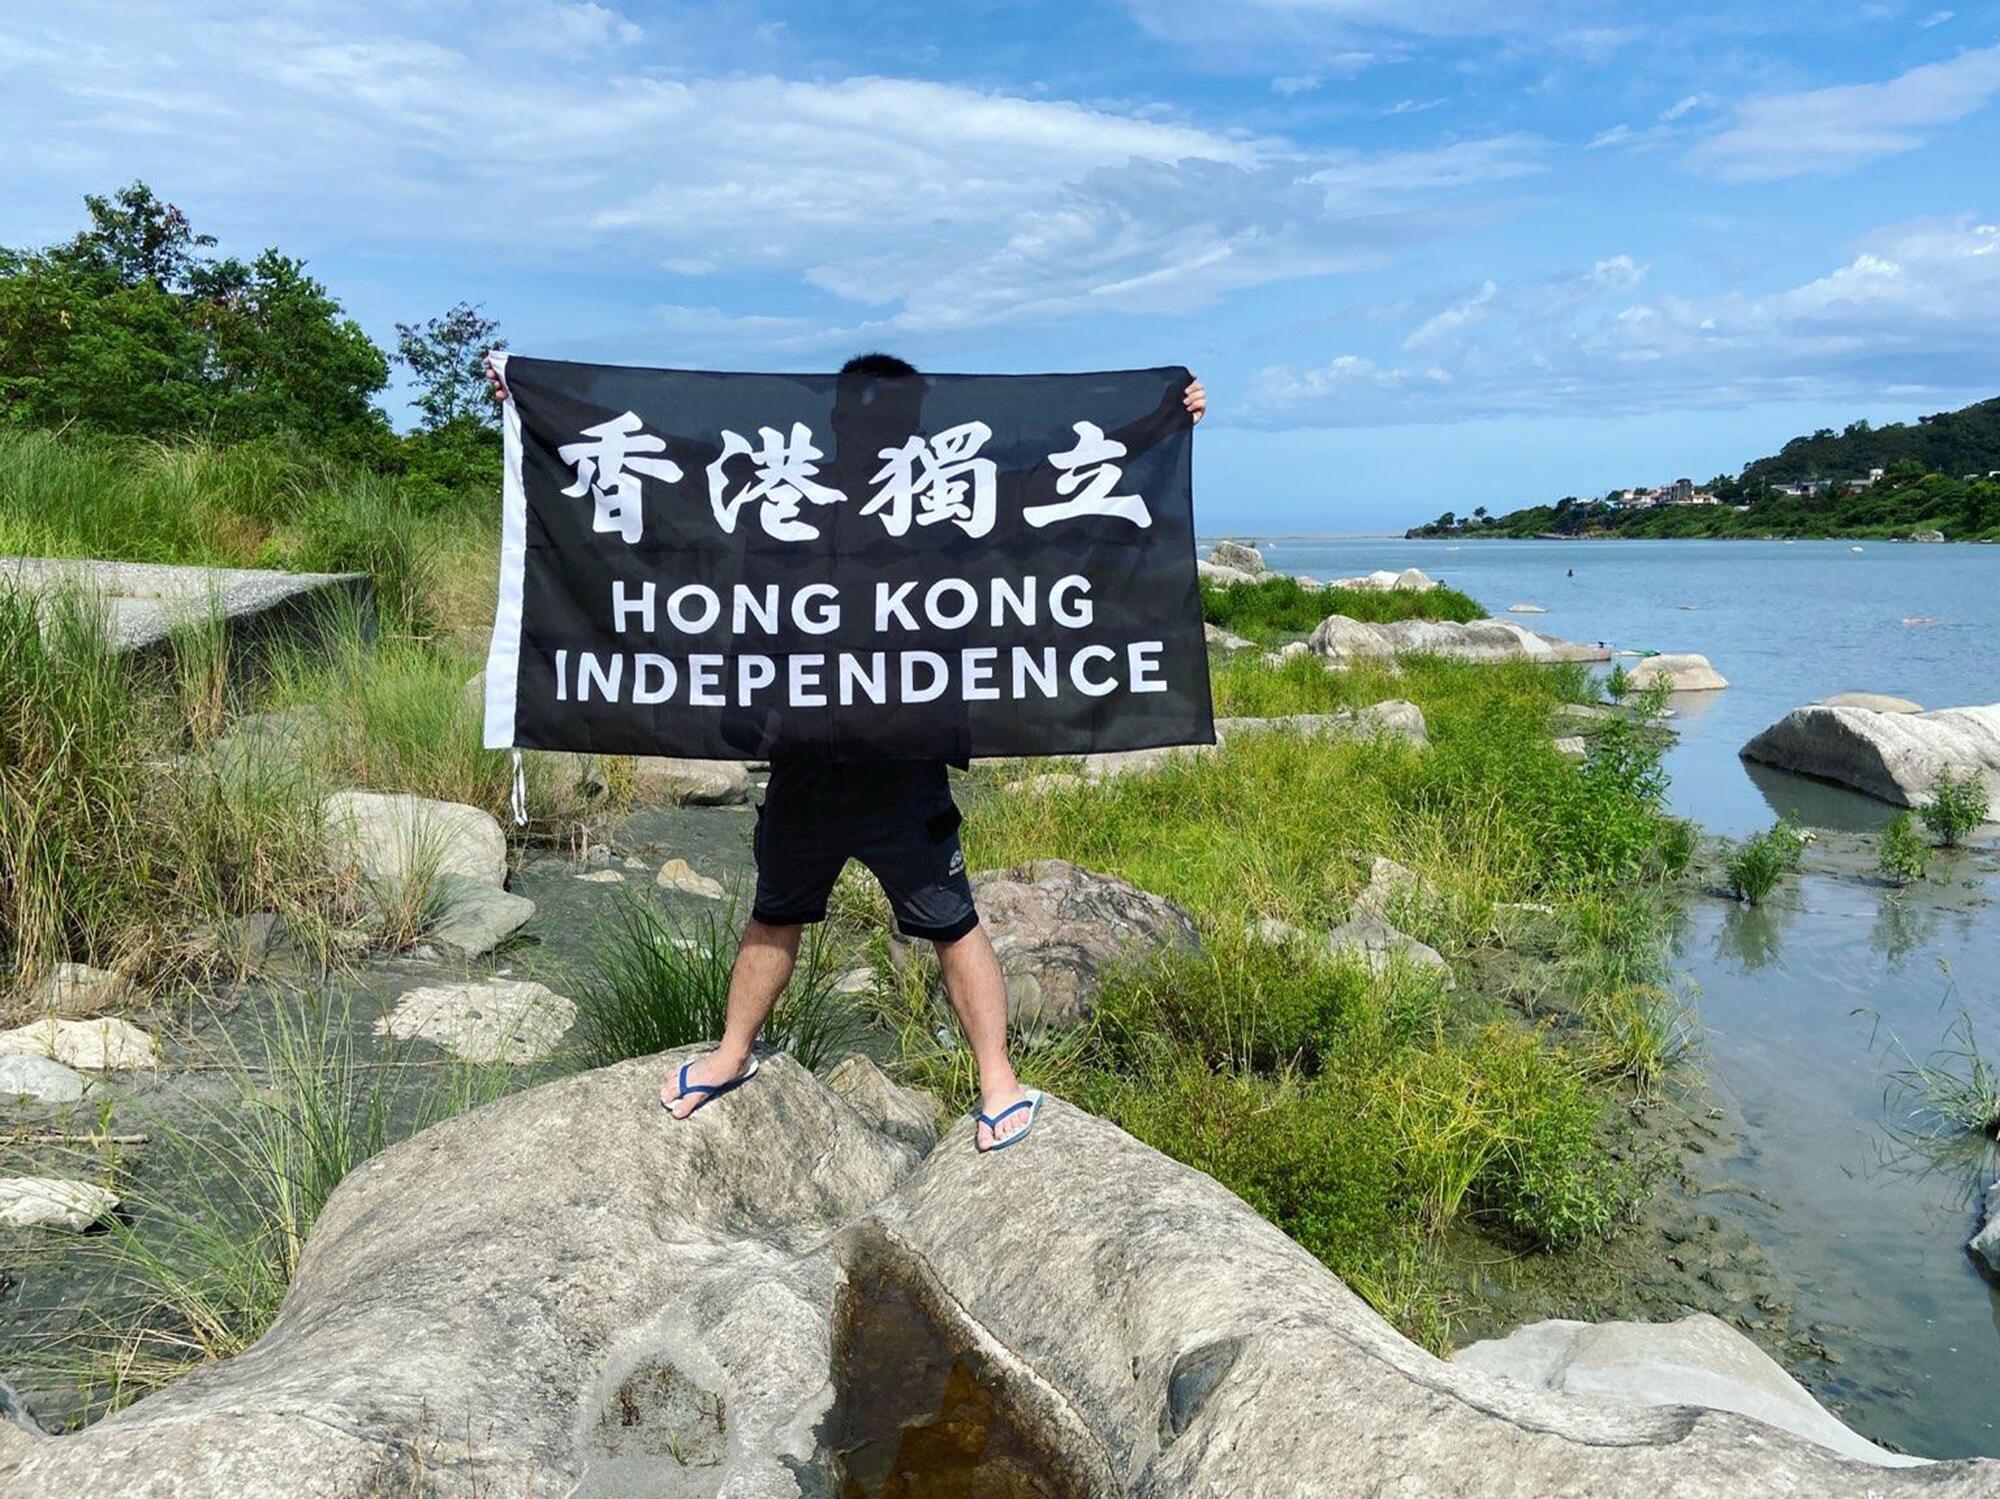 A young man standing on rocks near water holds a sign reading, "Hong Kong independence" 